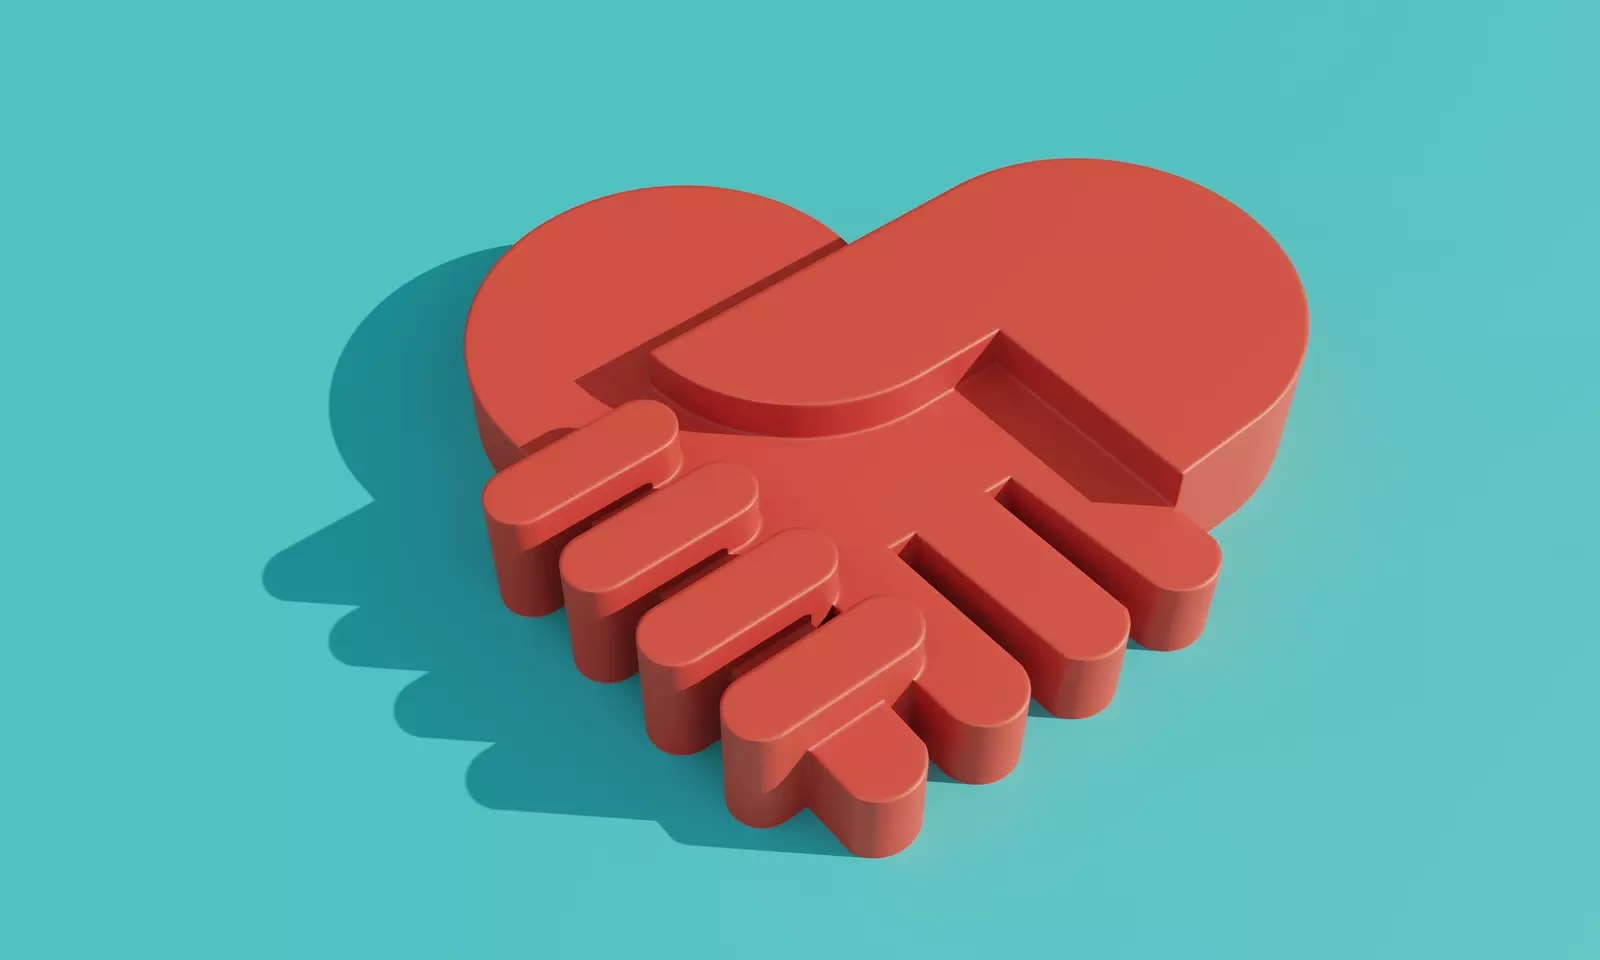 Hands and heart illustrating to demonstrate leading with love.